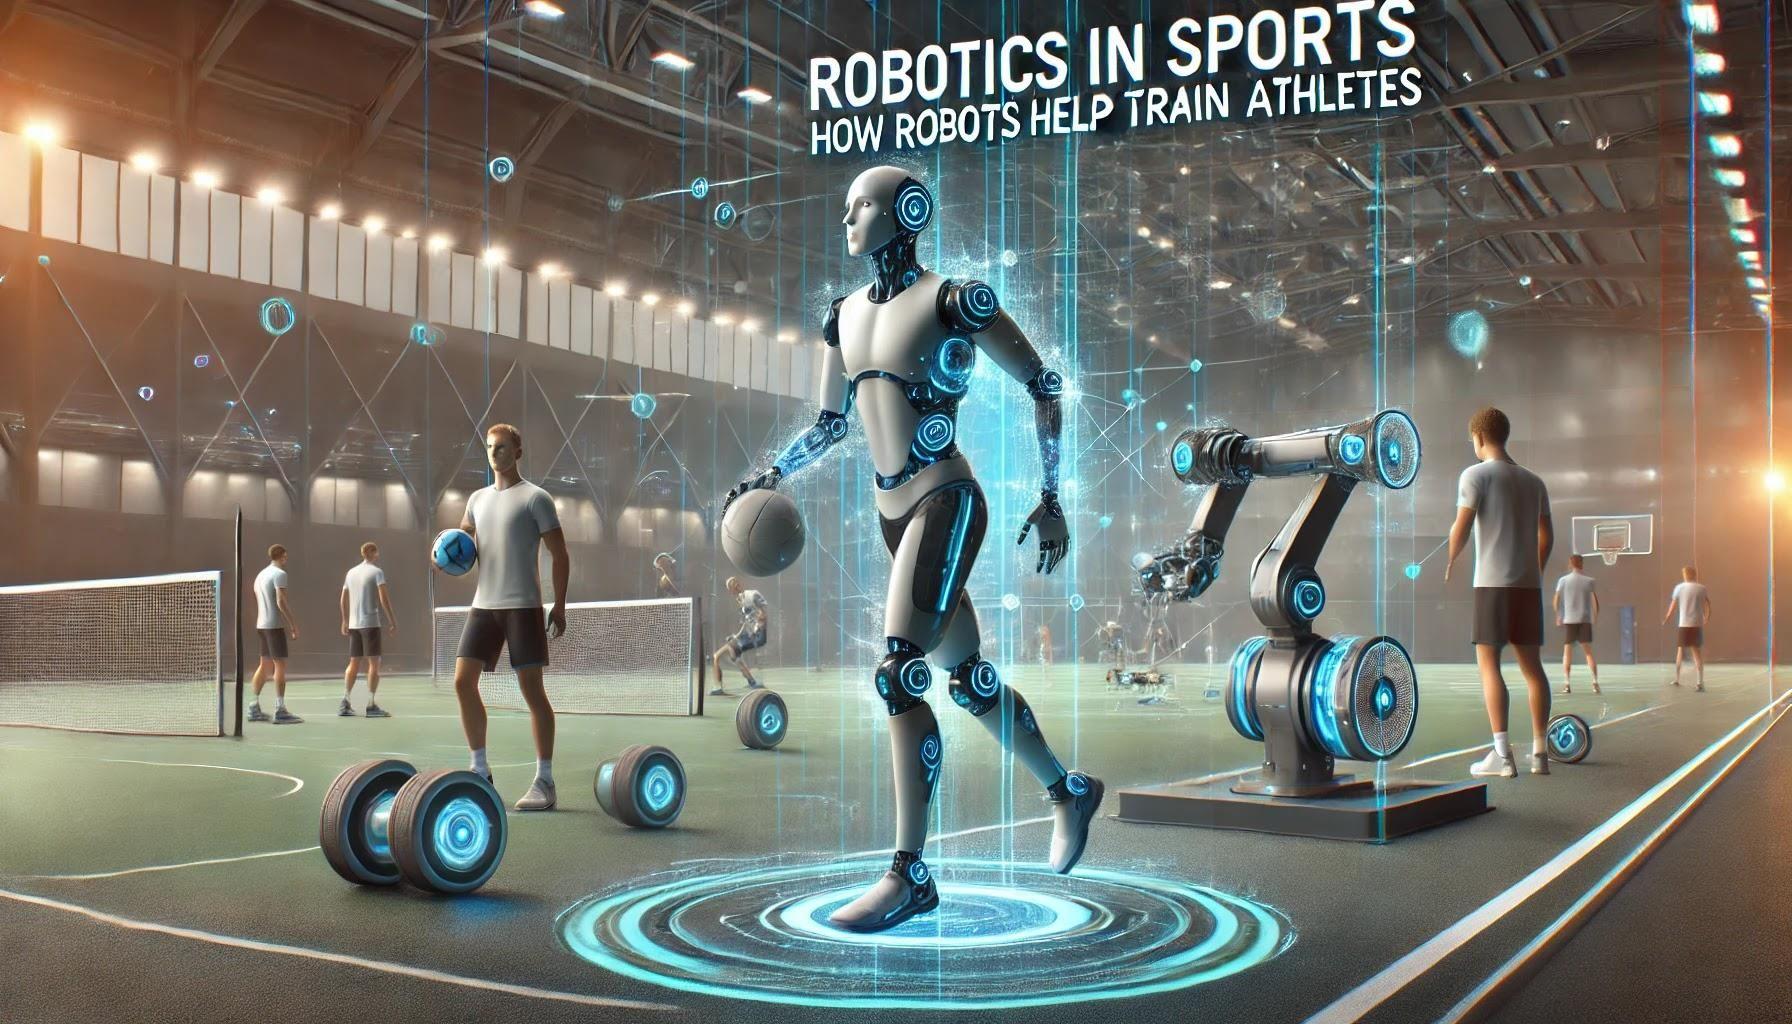 Robotics in Sports: How Robots Help Train Athletes and Recover from Injuries